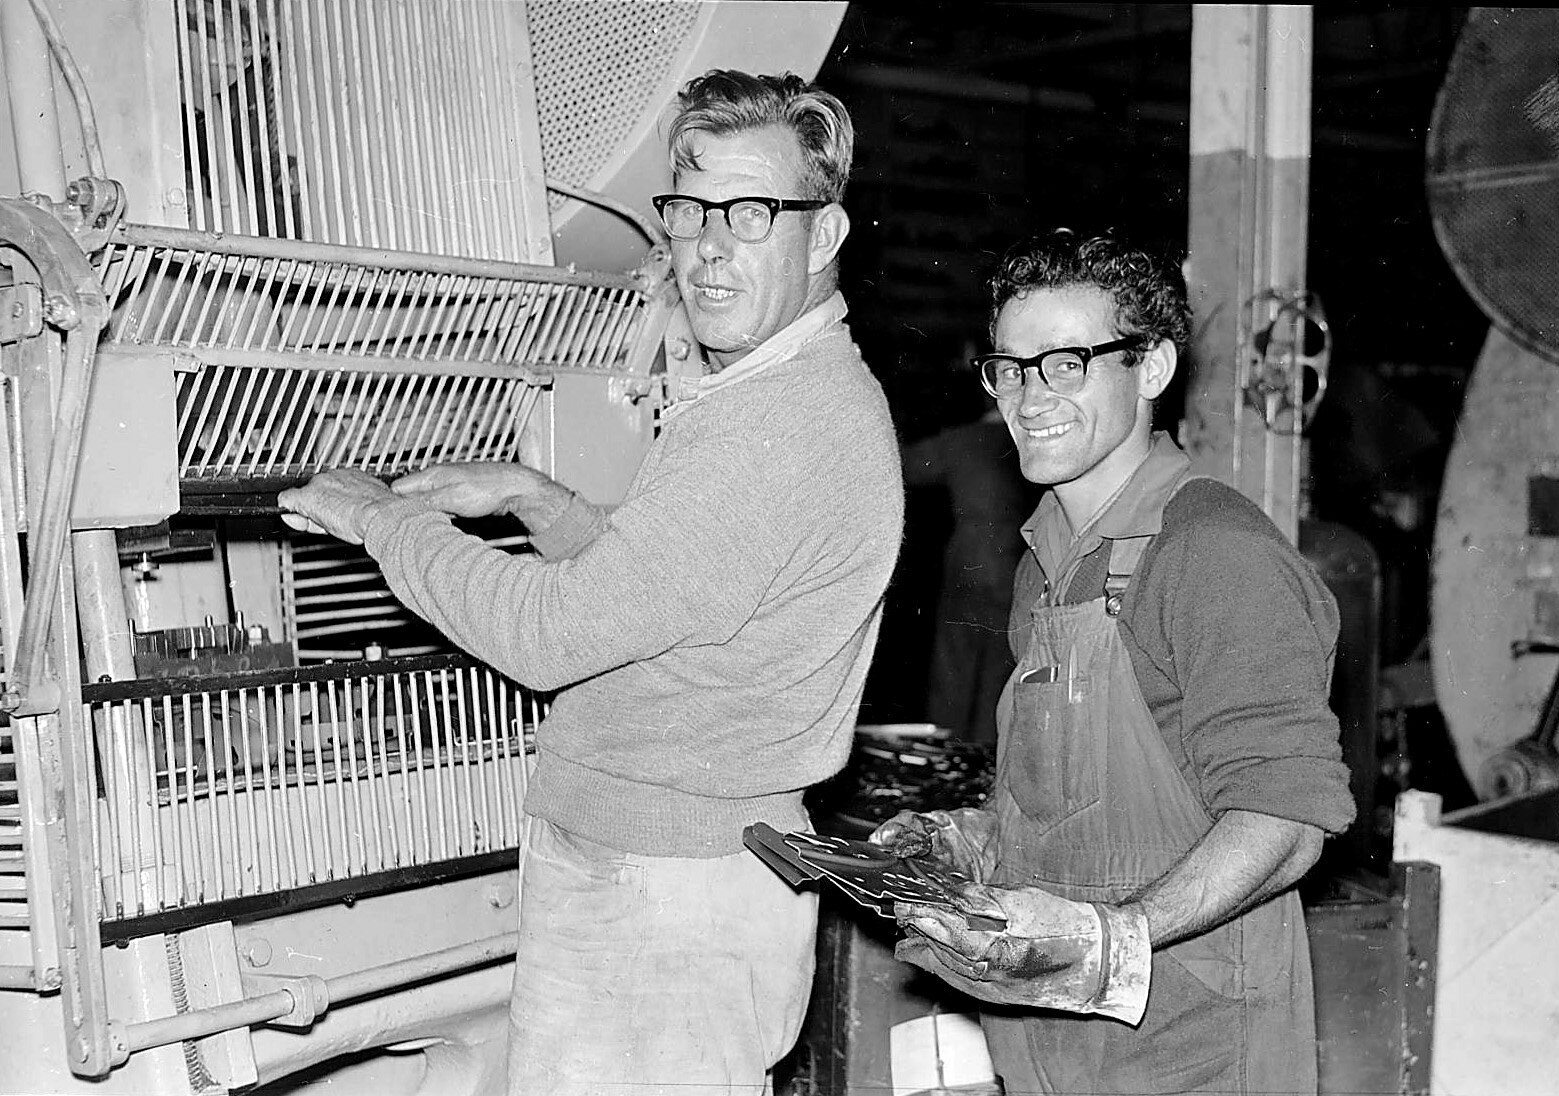 A black and white photo of two men, in overalls and jumpers working on a machine